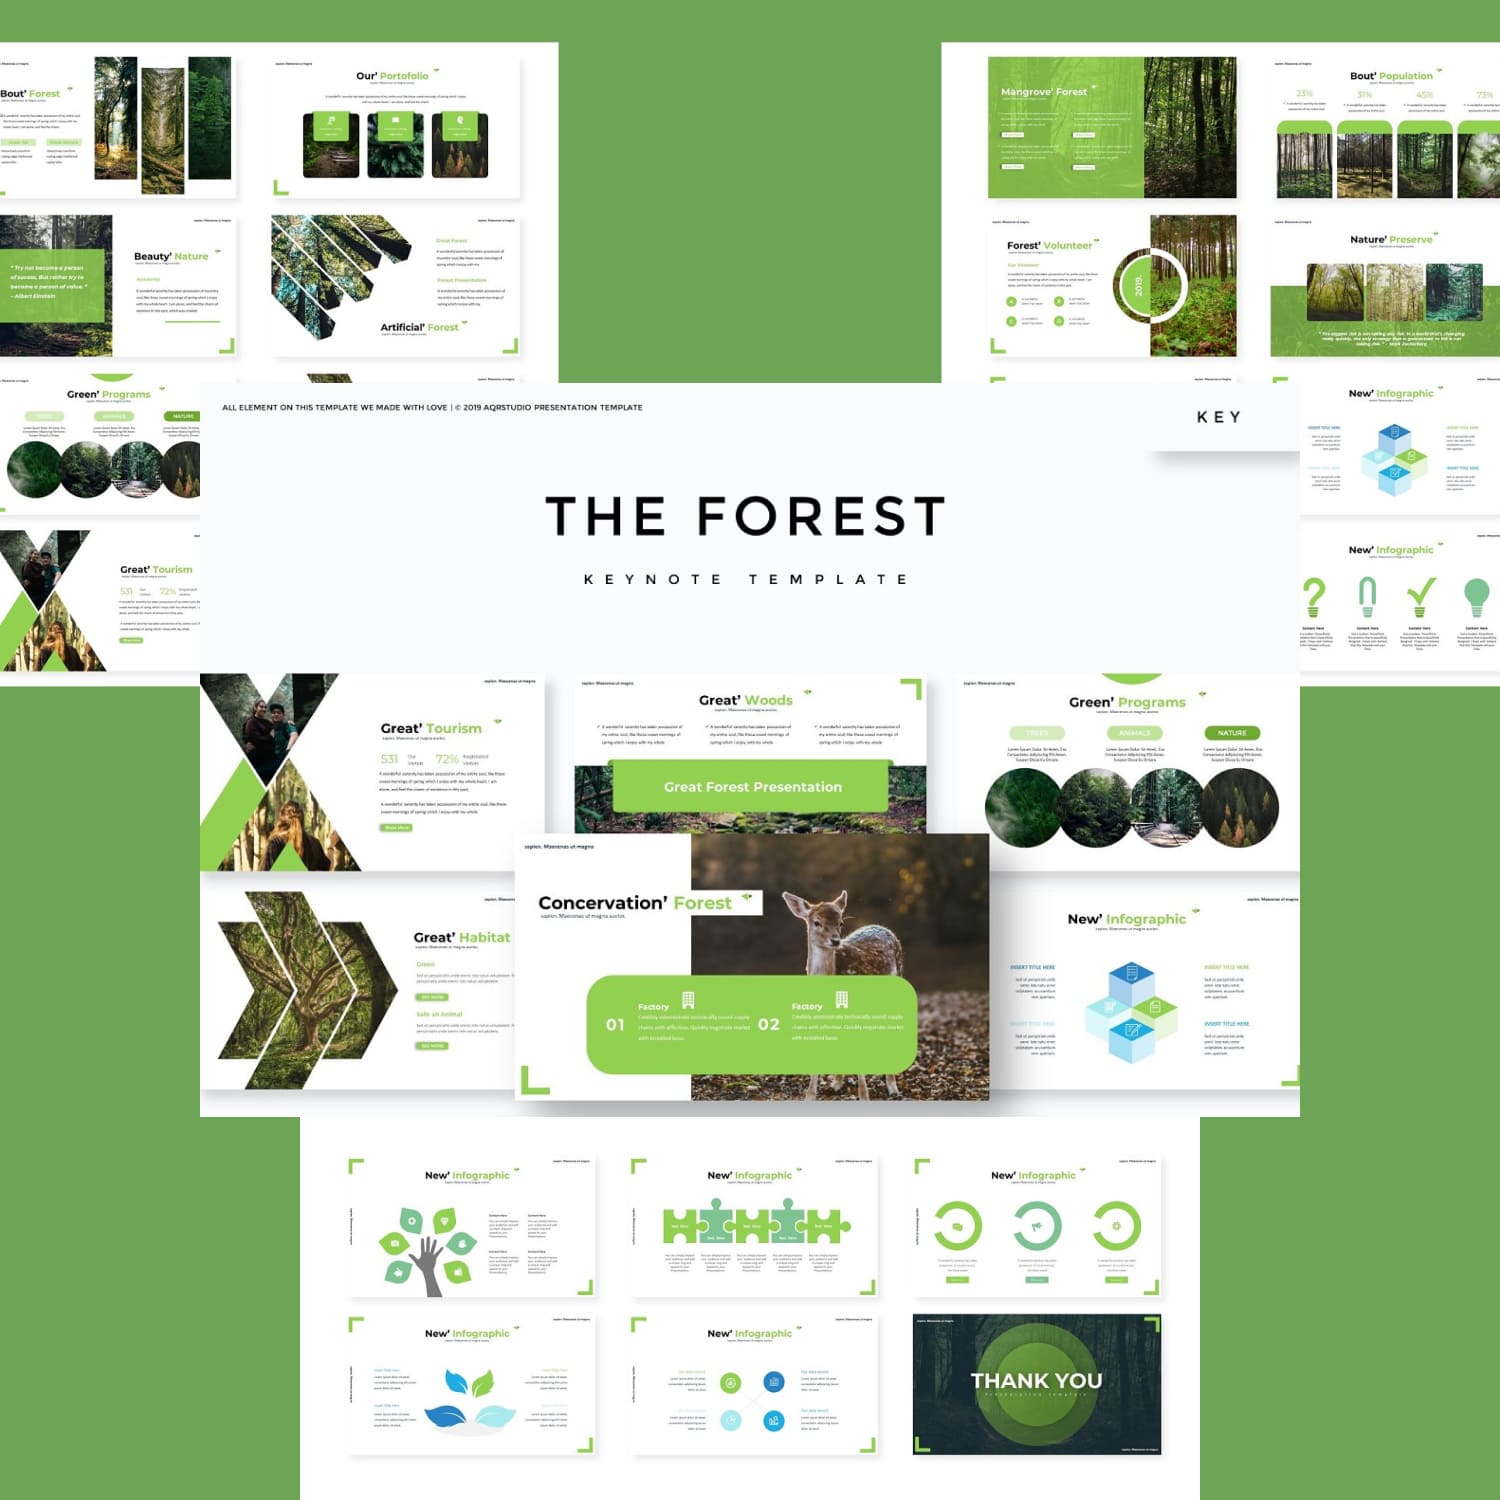 The Forest - Keynote Template cover.